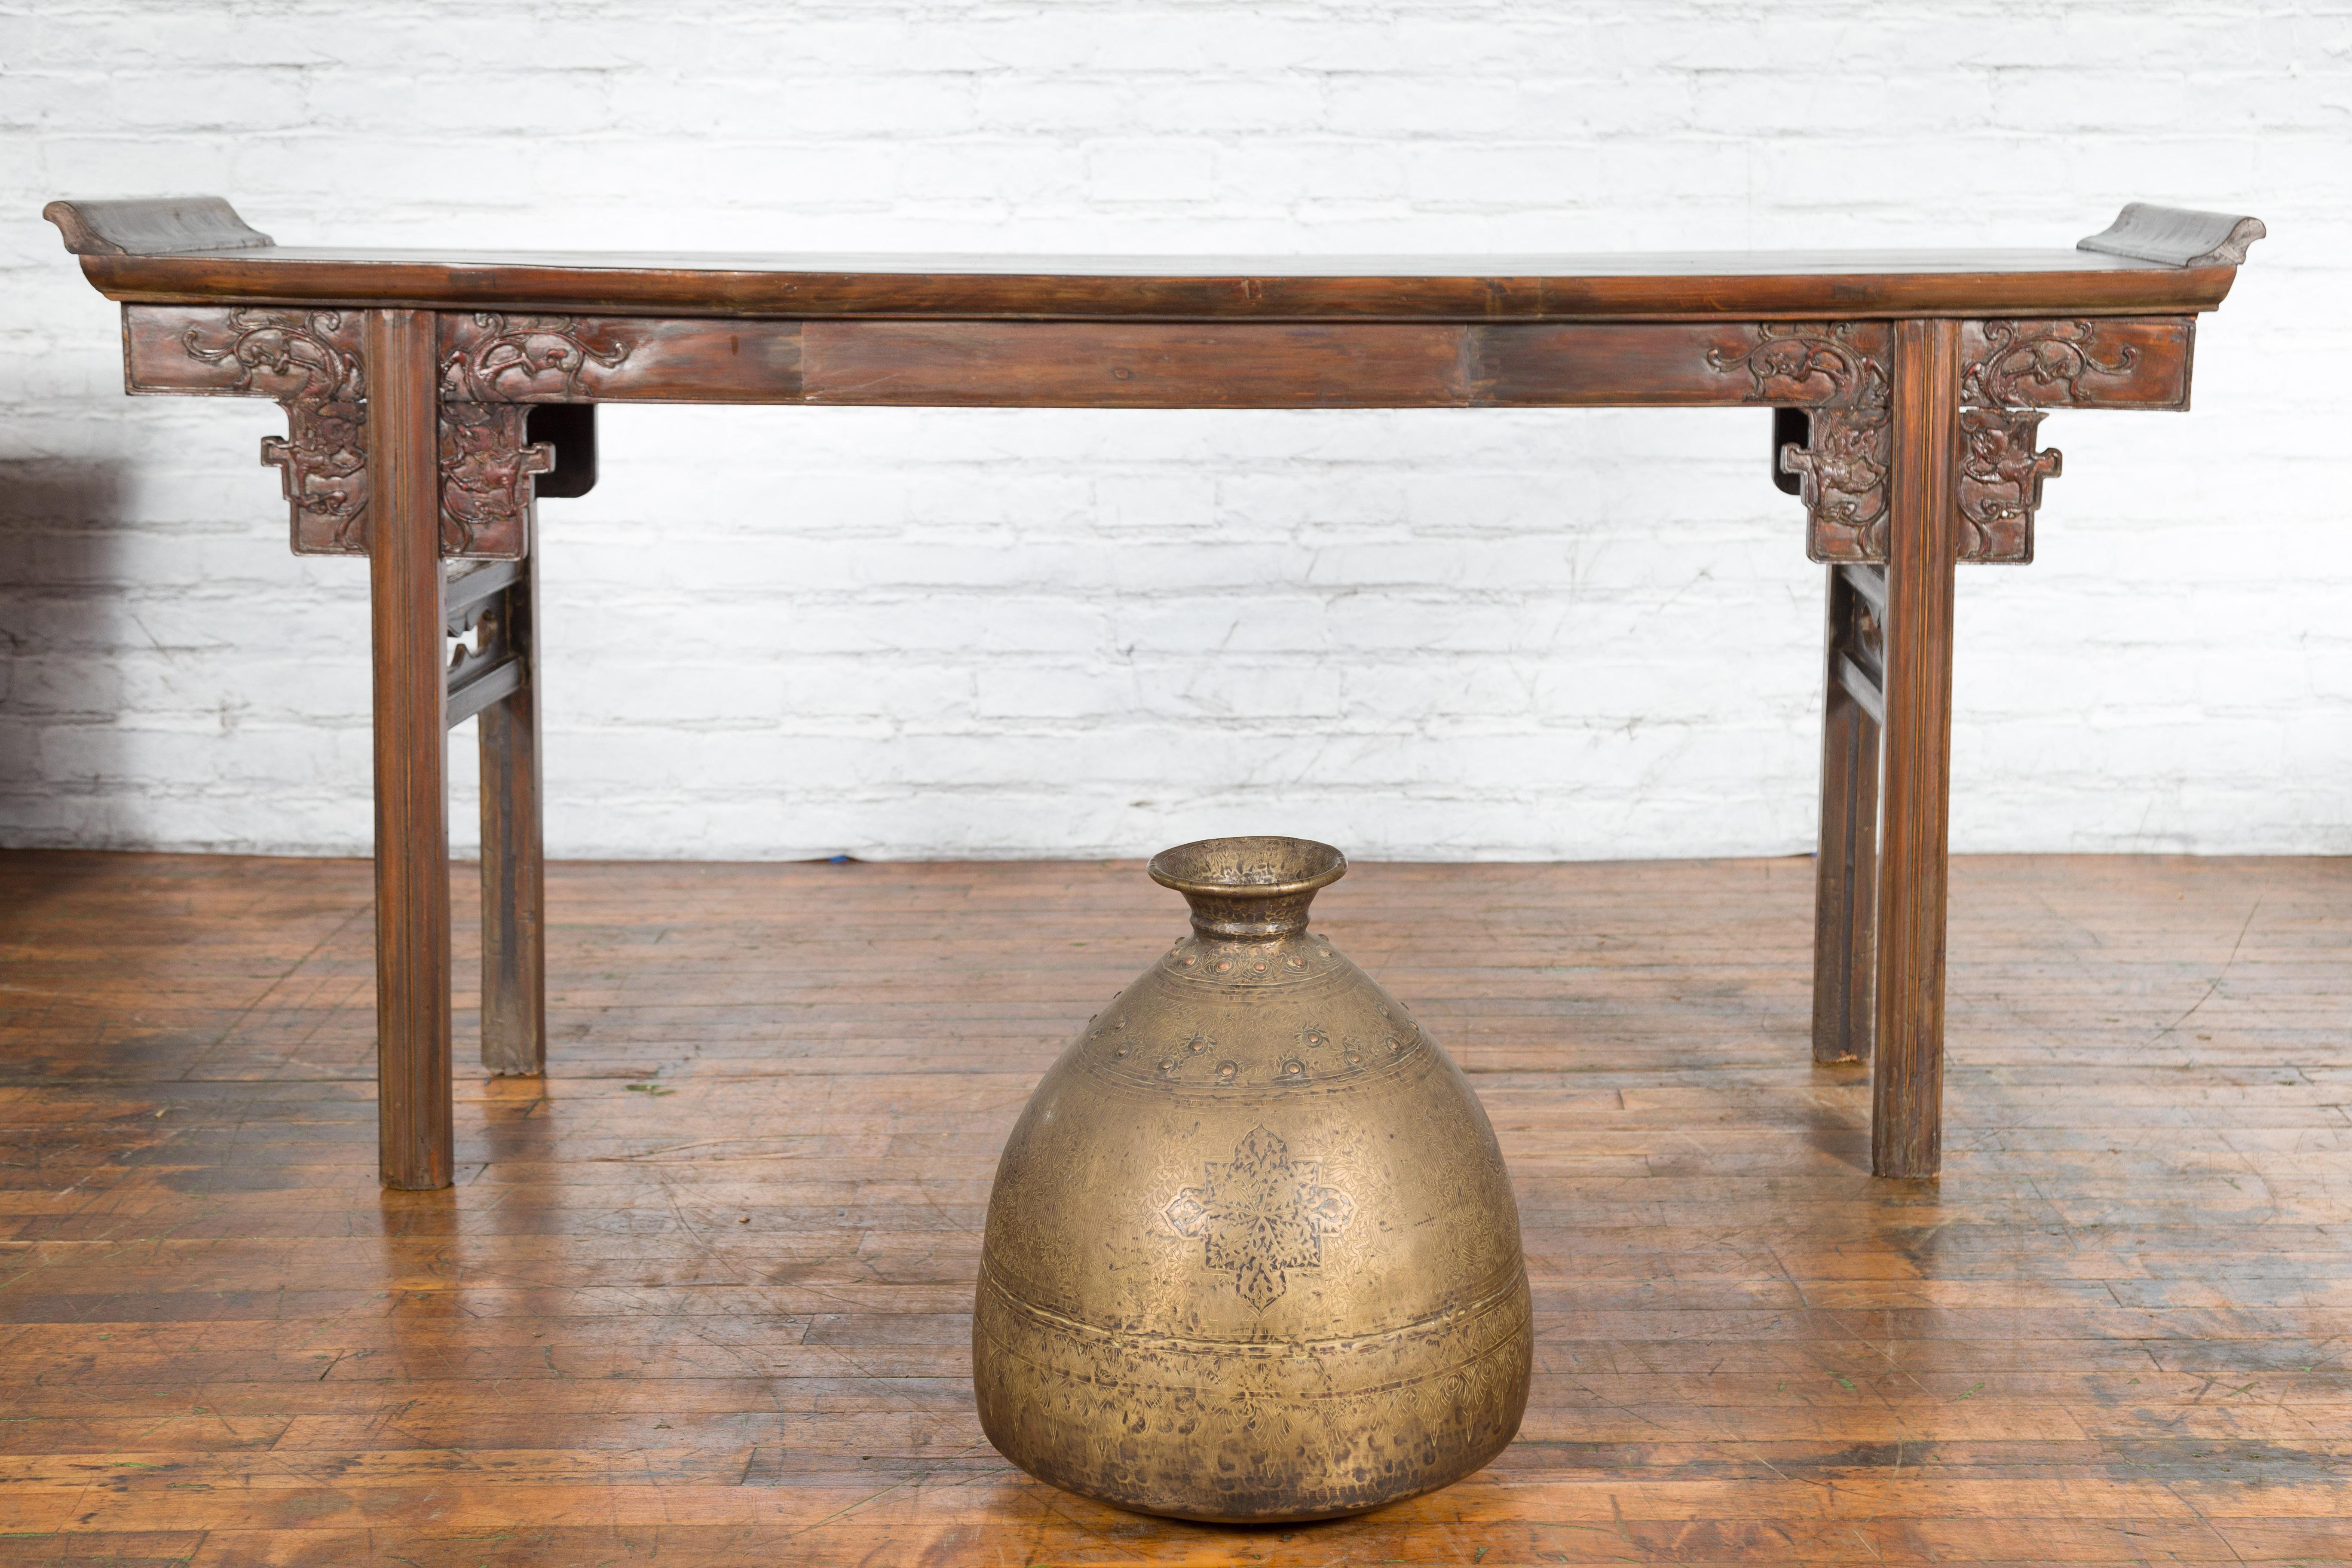 An Indian brass vase from the 19th century, with etched floral décor. Created in India during the 19th century, this large brass vase captures our attention with its generous lines and skillfully etched foliage décor. Showcasing a small opening